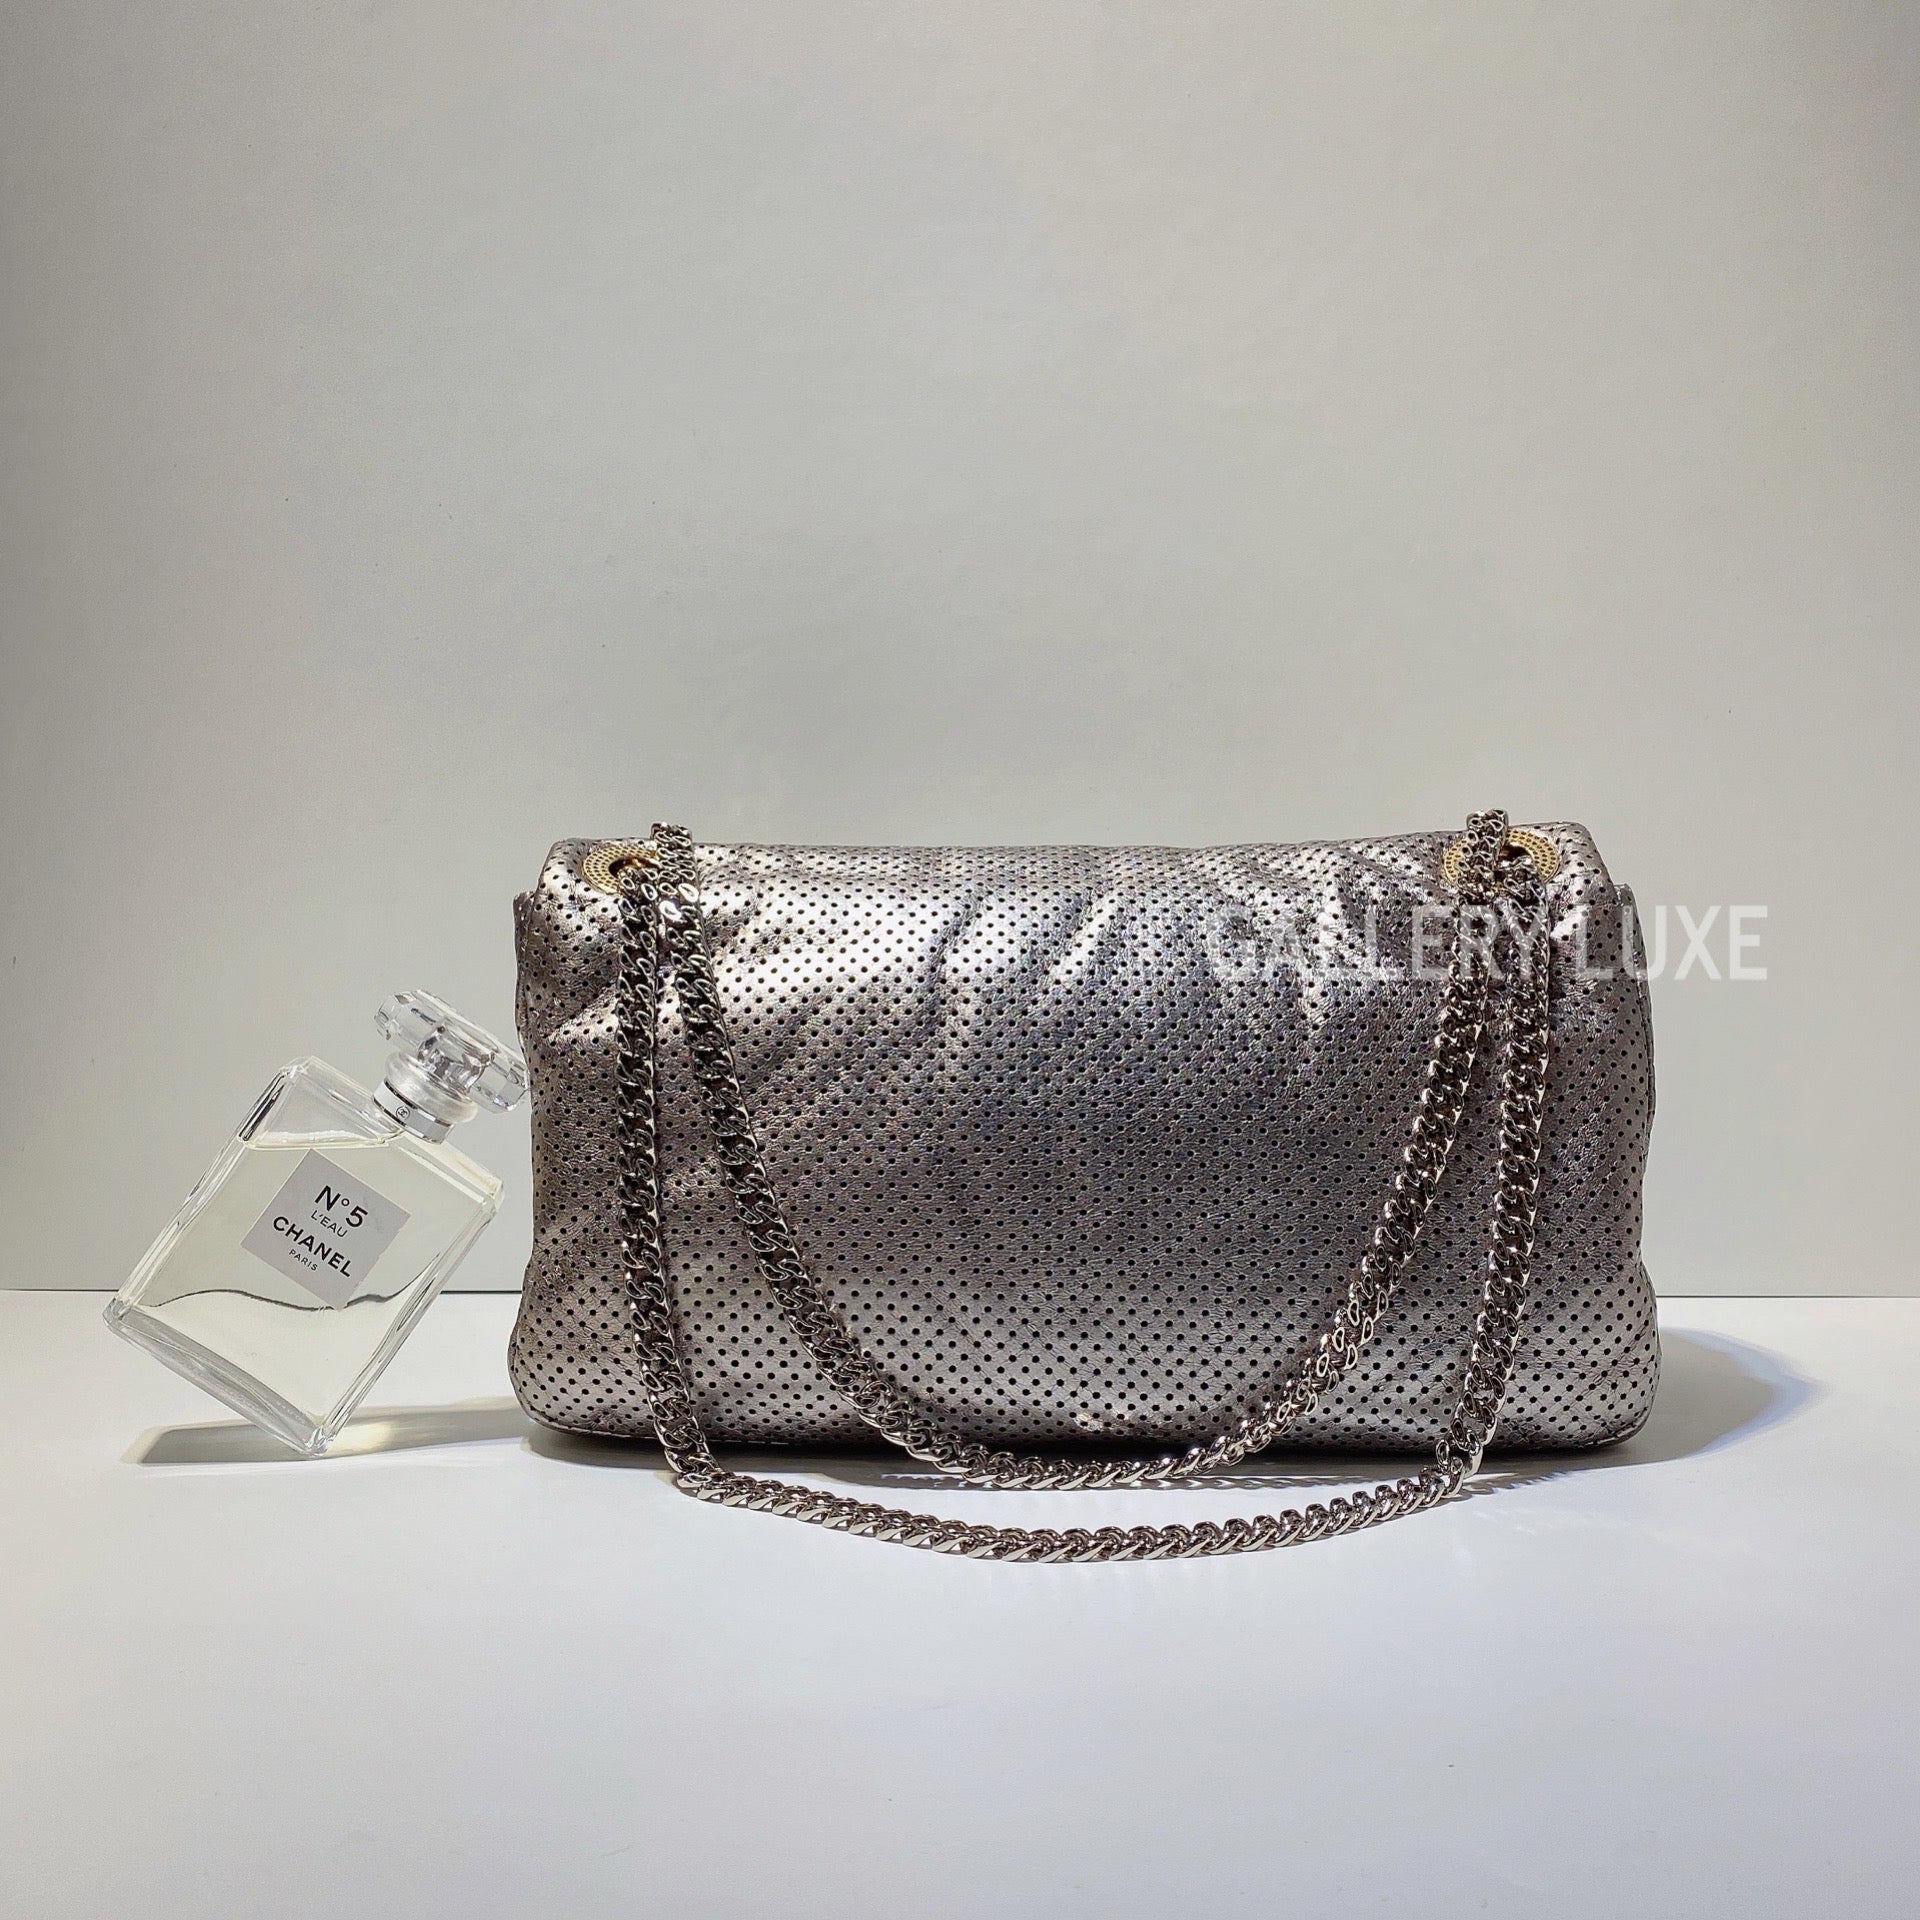 Chanel Metallic Green Drill Perforated Leather Large Tote Bag Double  Hardware Gold/ Silver Series 11xxx. Made in Italy.